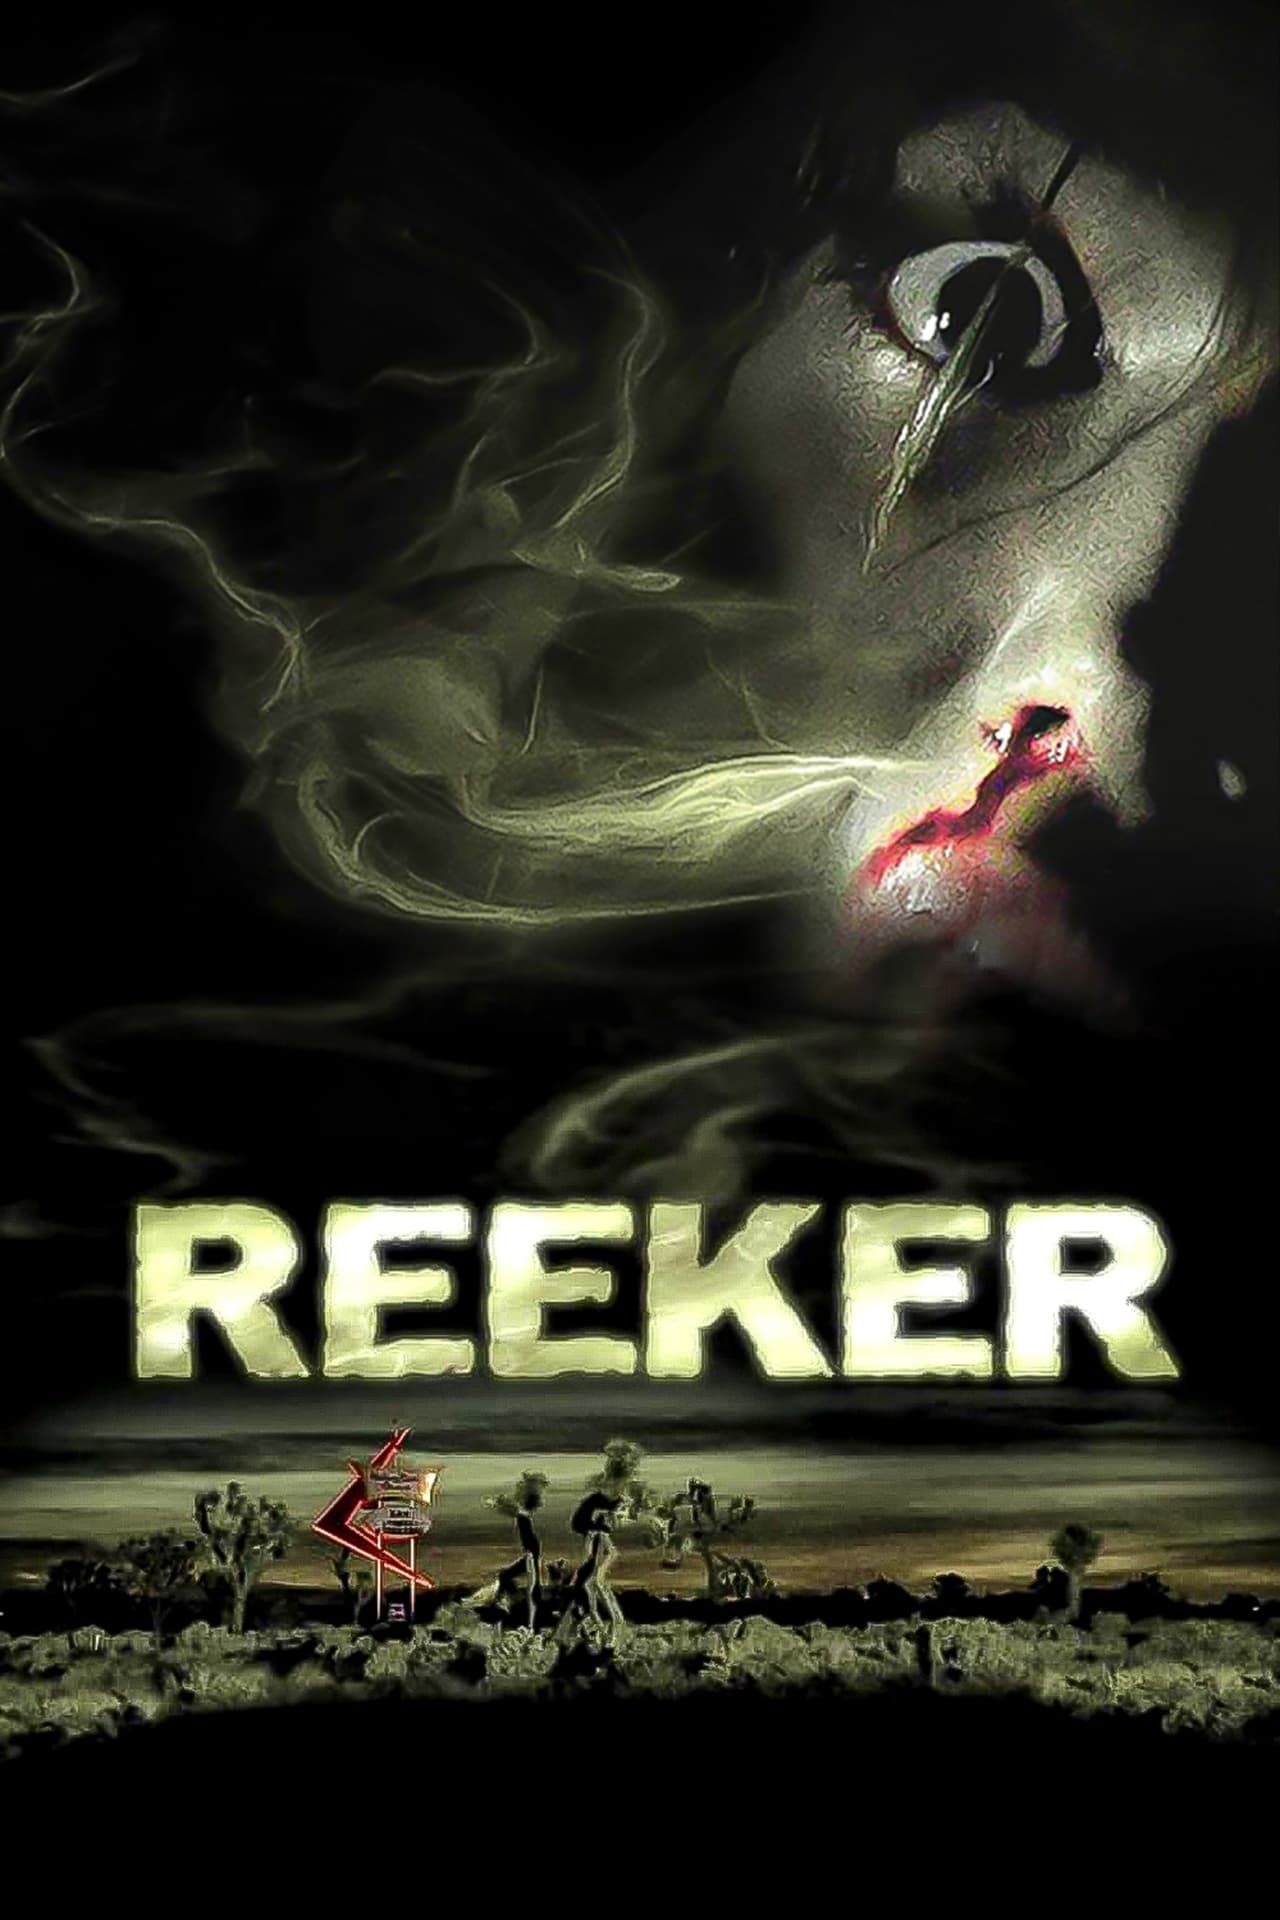 Reeker Movie Poster Showing A Corpse Flying in Smoke